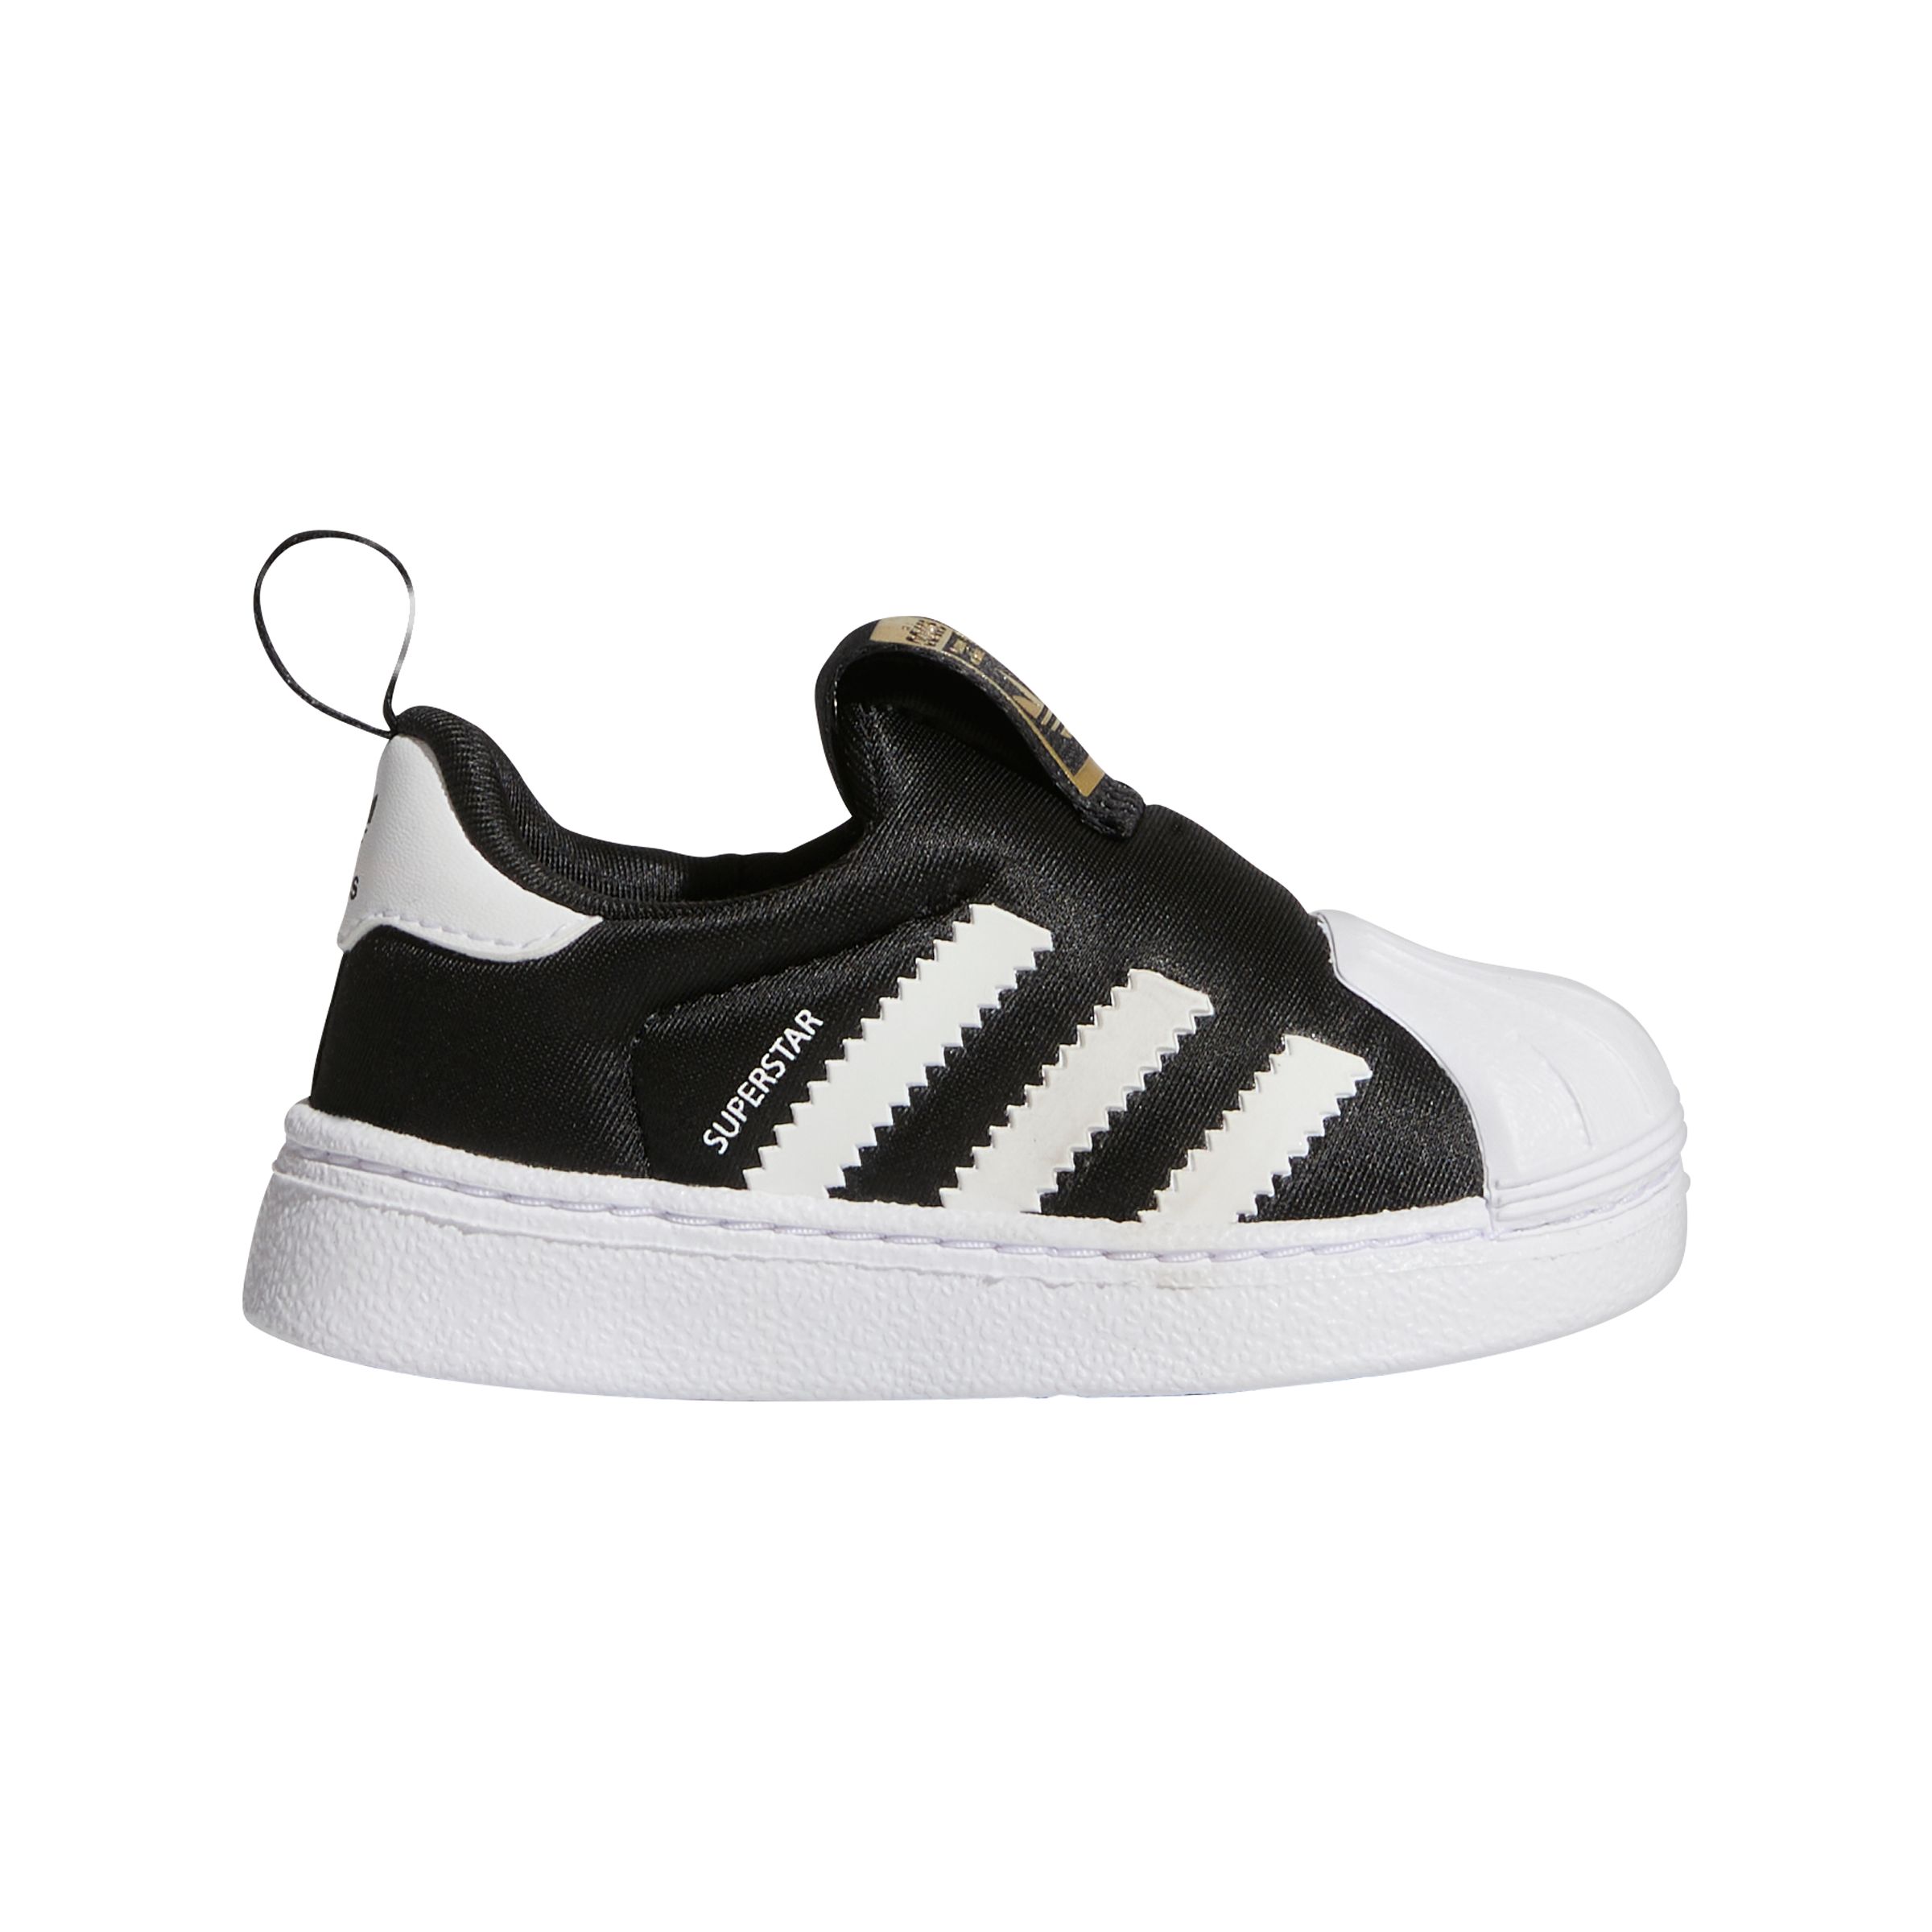 Image of adidas Kids' Superstar 360 Shoes